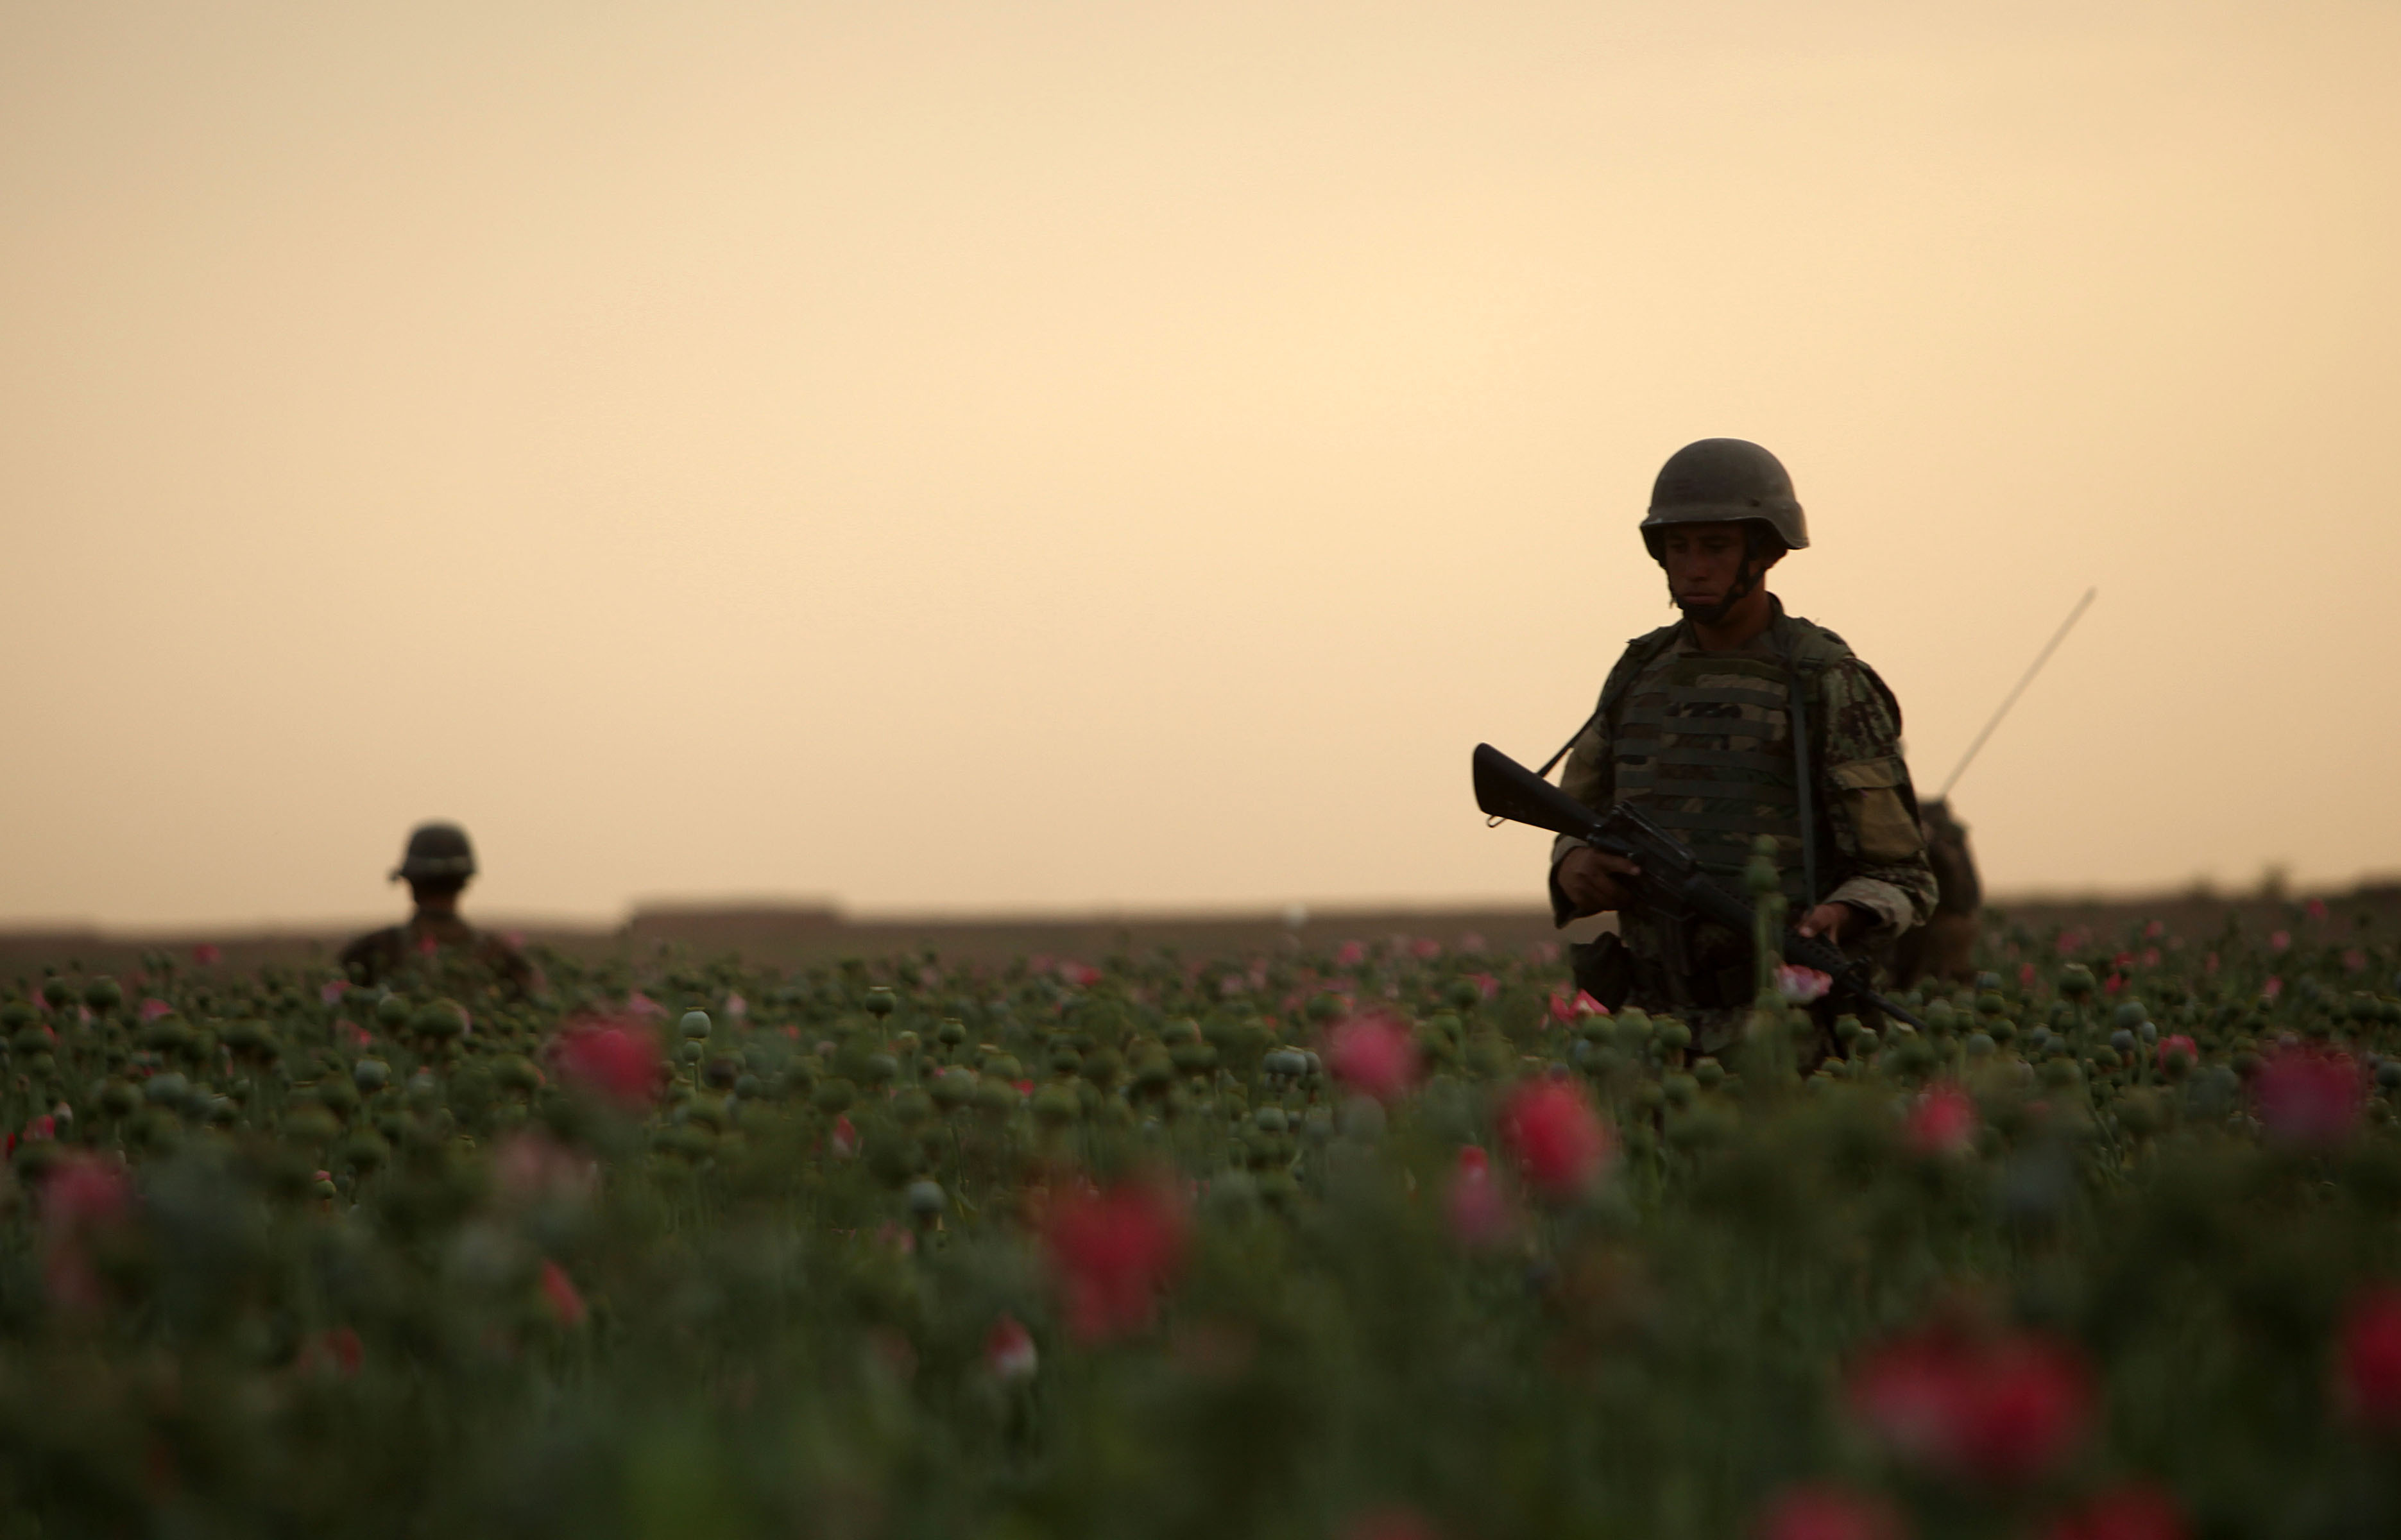 Afghan National Army (ANA) soldiers conduct a satellite patrol through a poppy field in Marjah, Afghanistan, April 17, 2012. (U.S. Marine Corps photo)